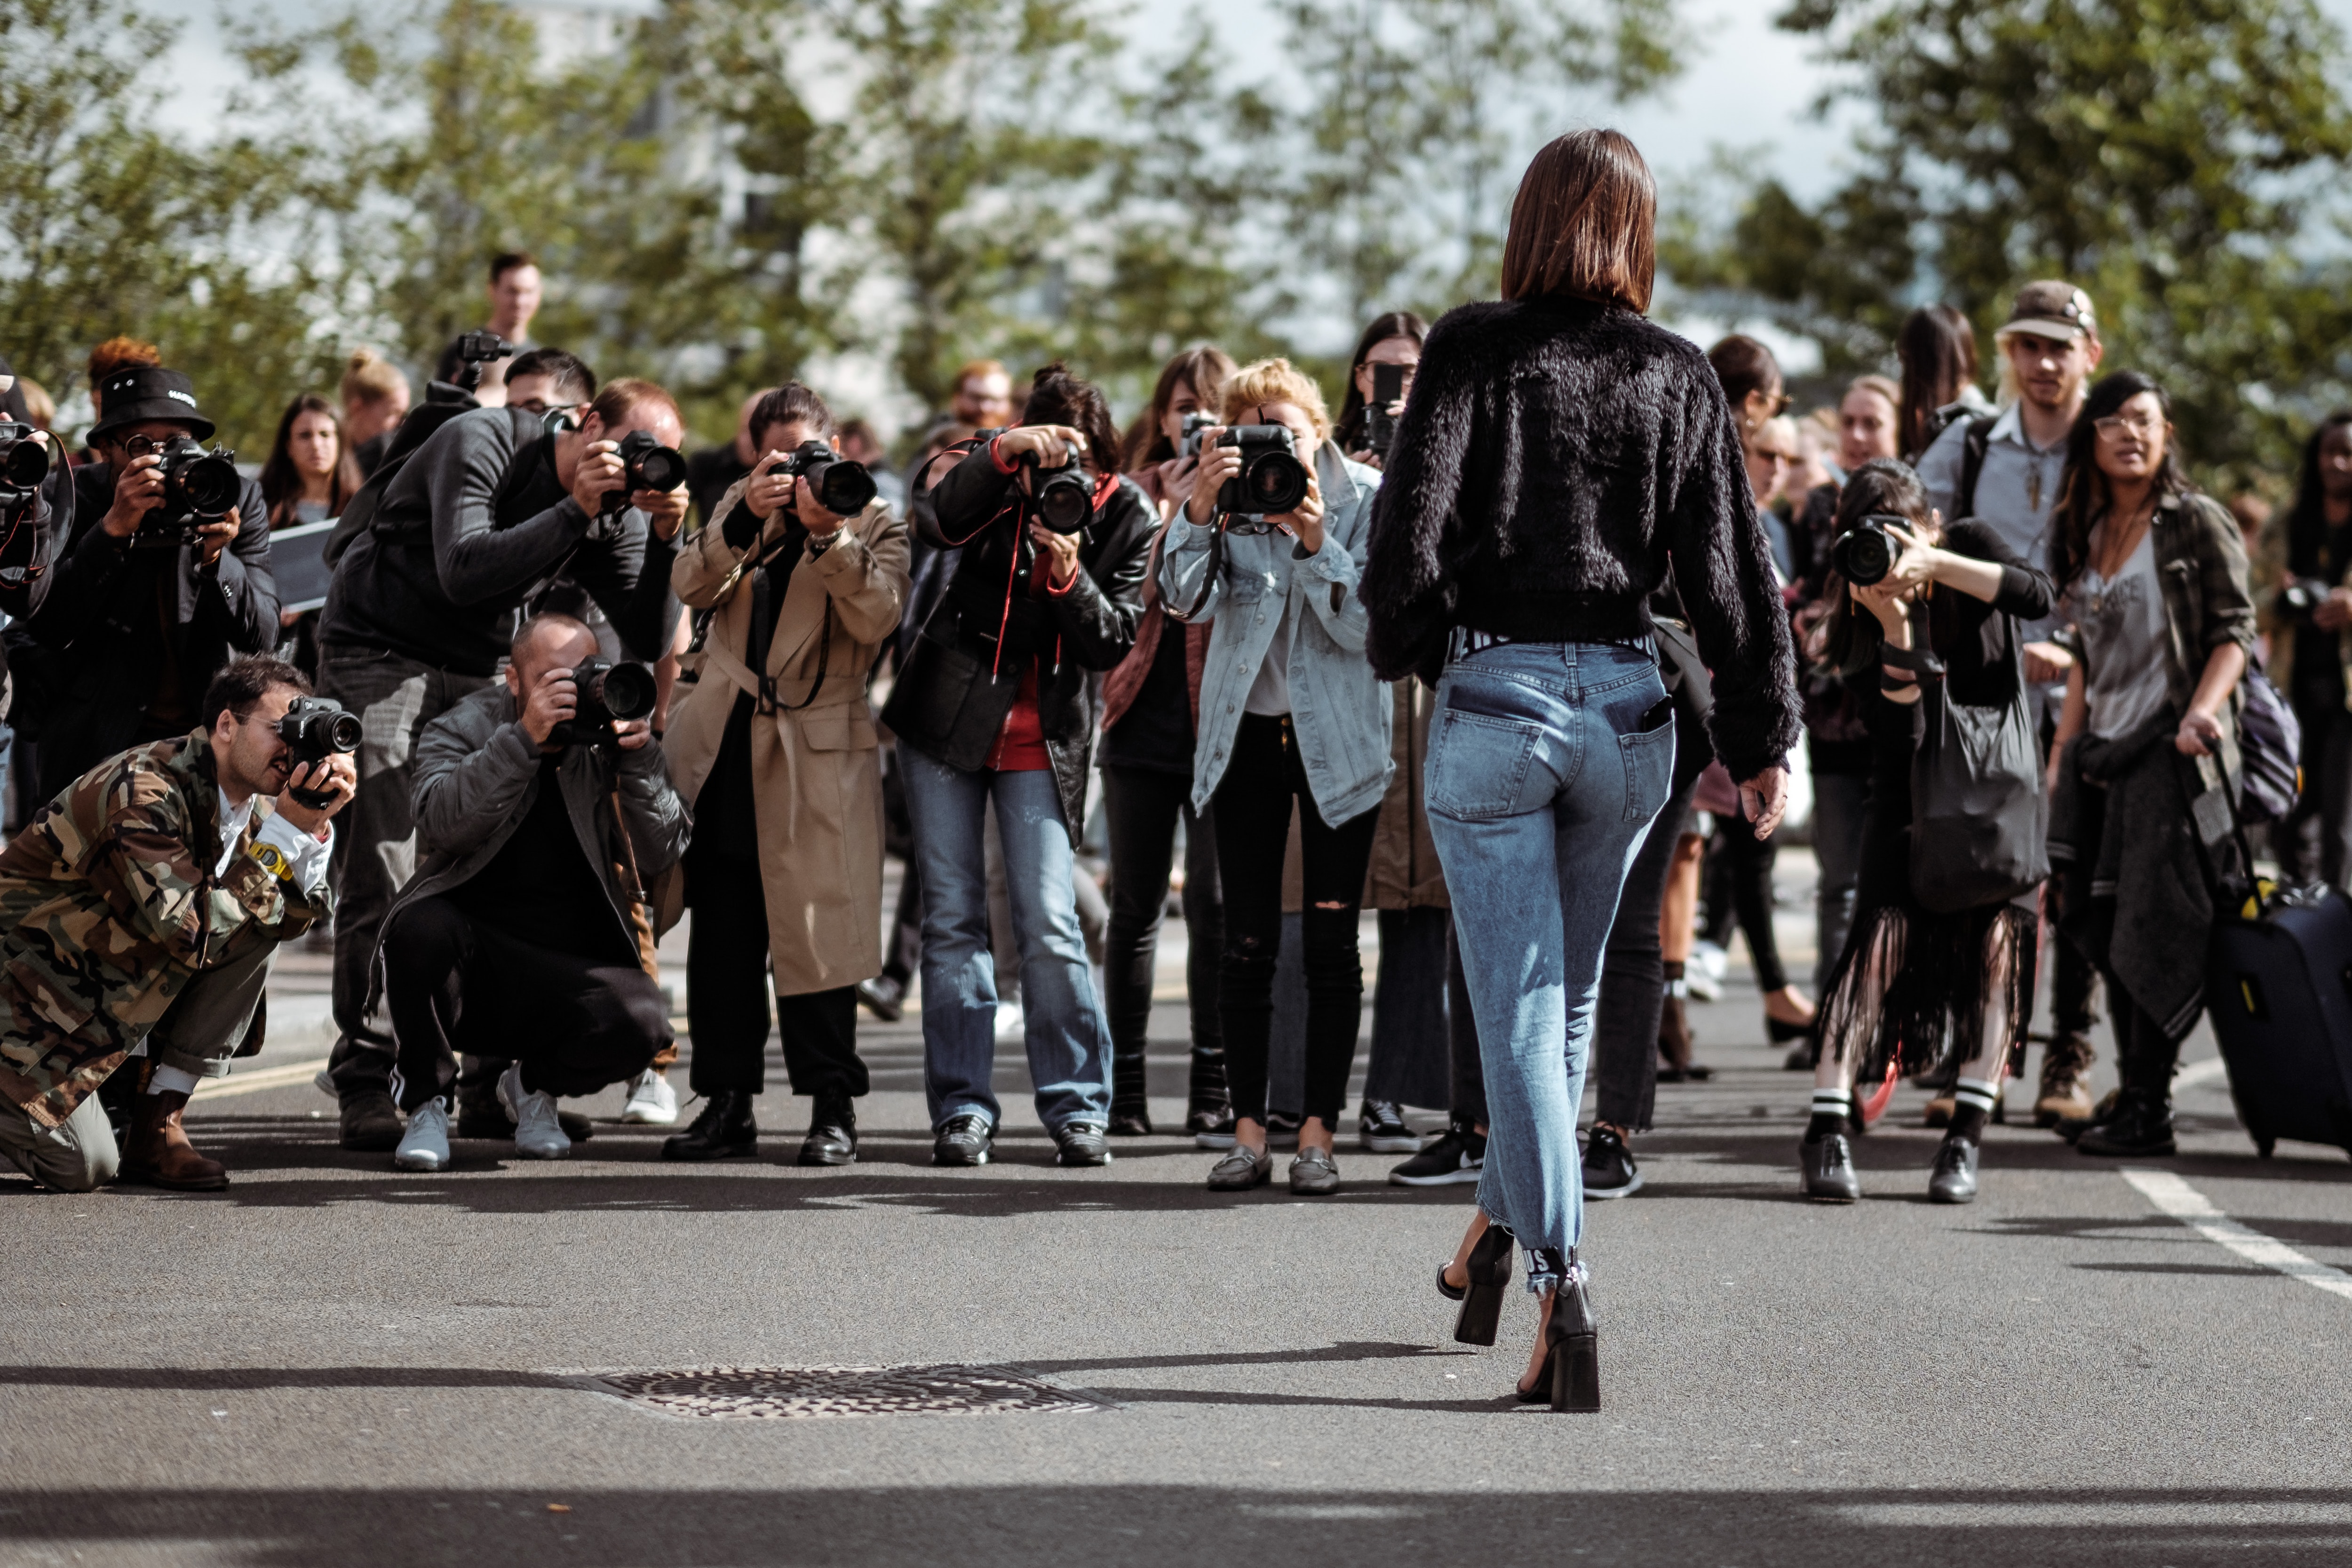 A photo of a woman from behind being photographed by a large group of photographers.